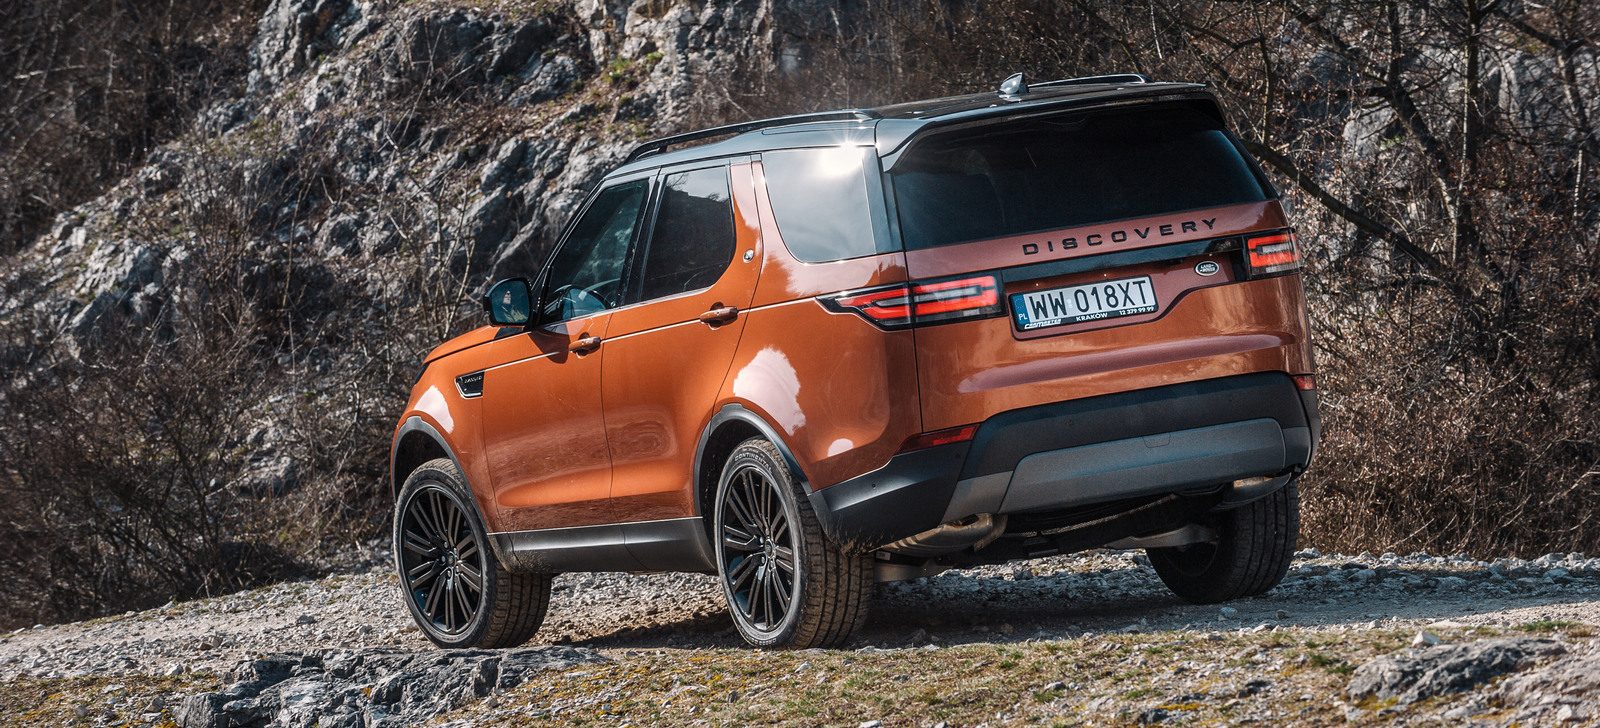 land rover discovery V - test i opinia